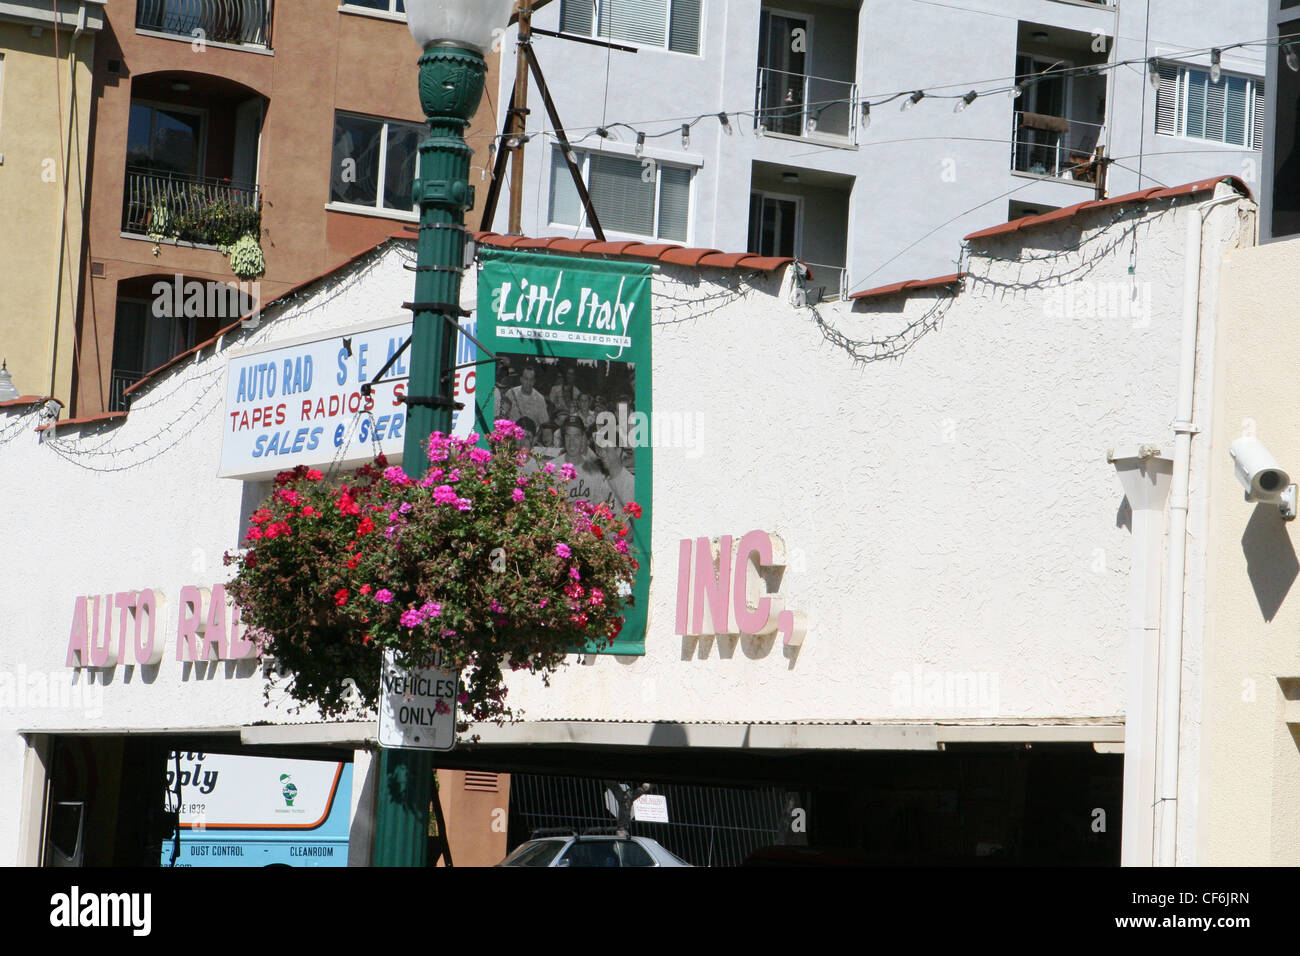 Images of San Diego, California, Little Italy Stock Photo